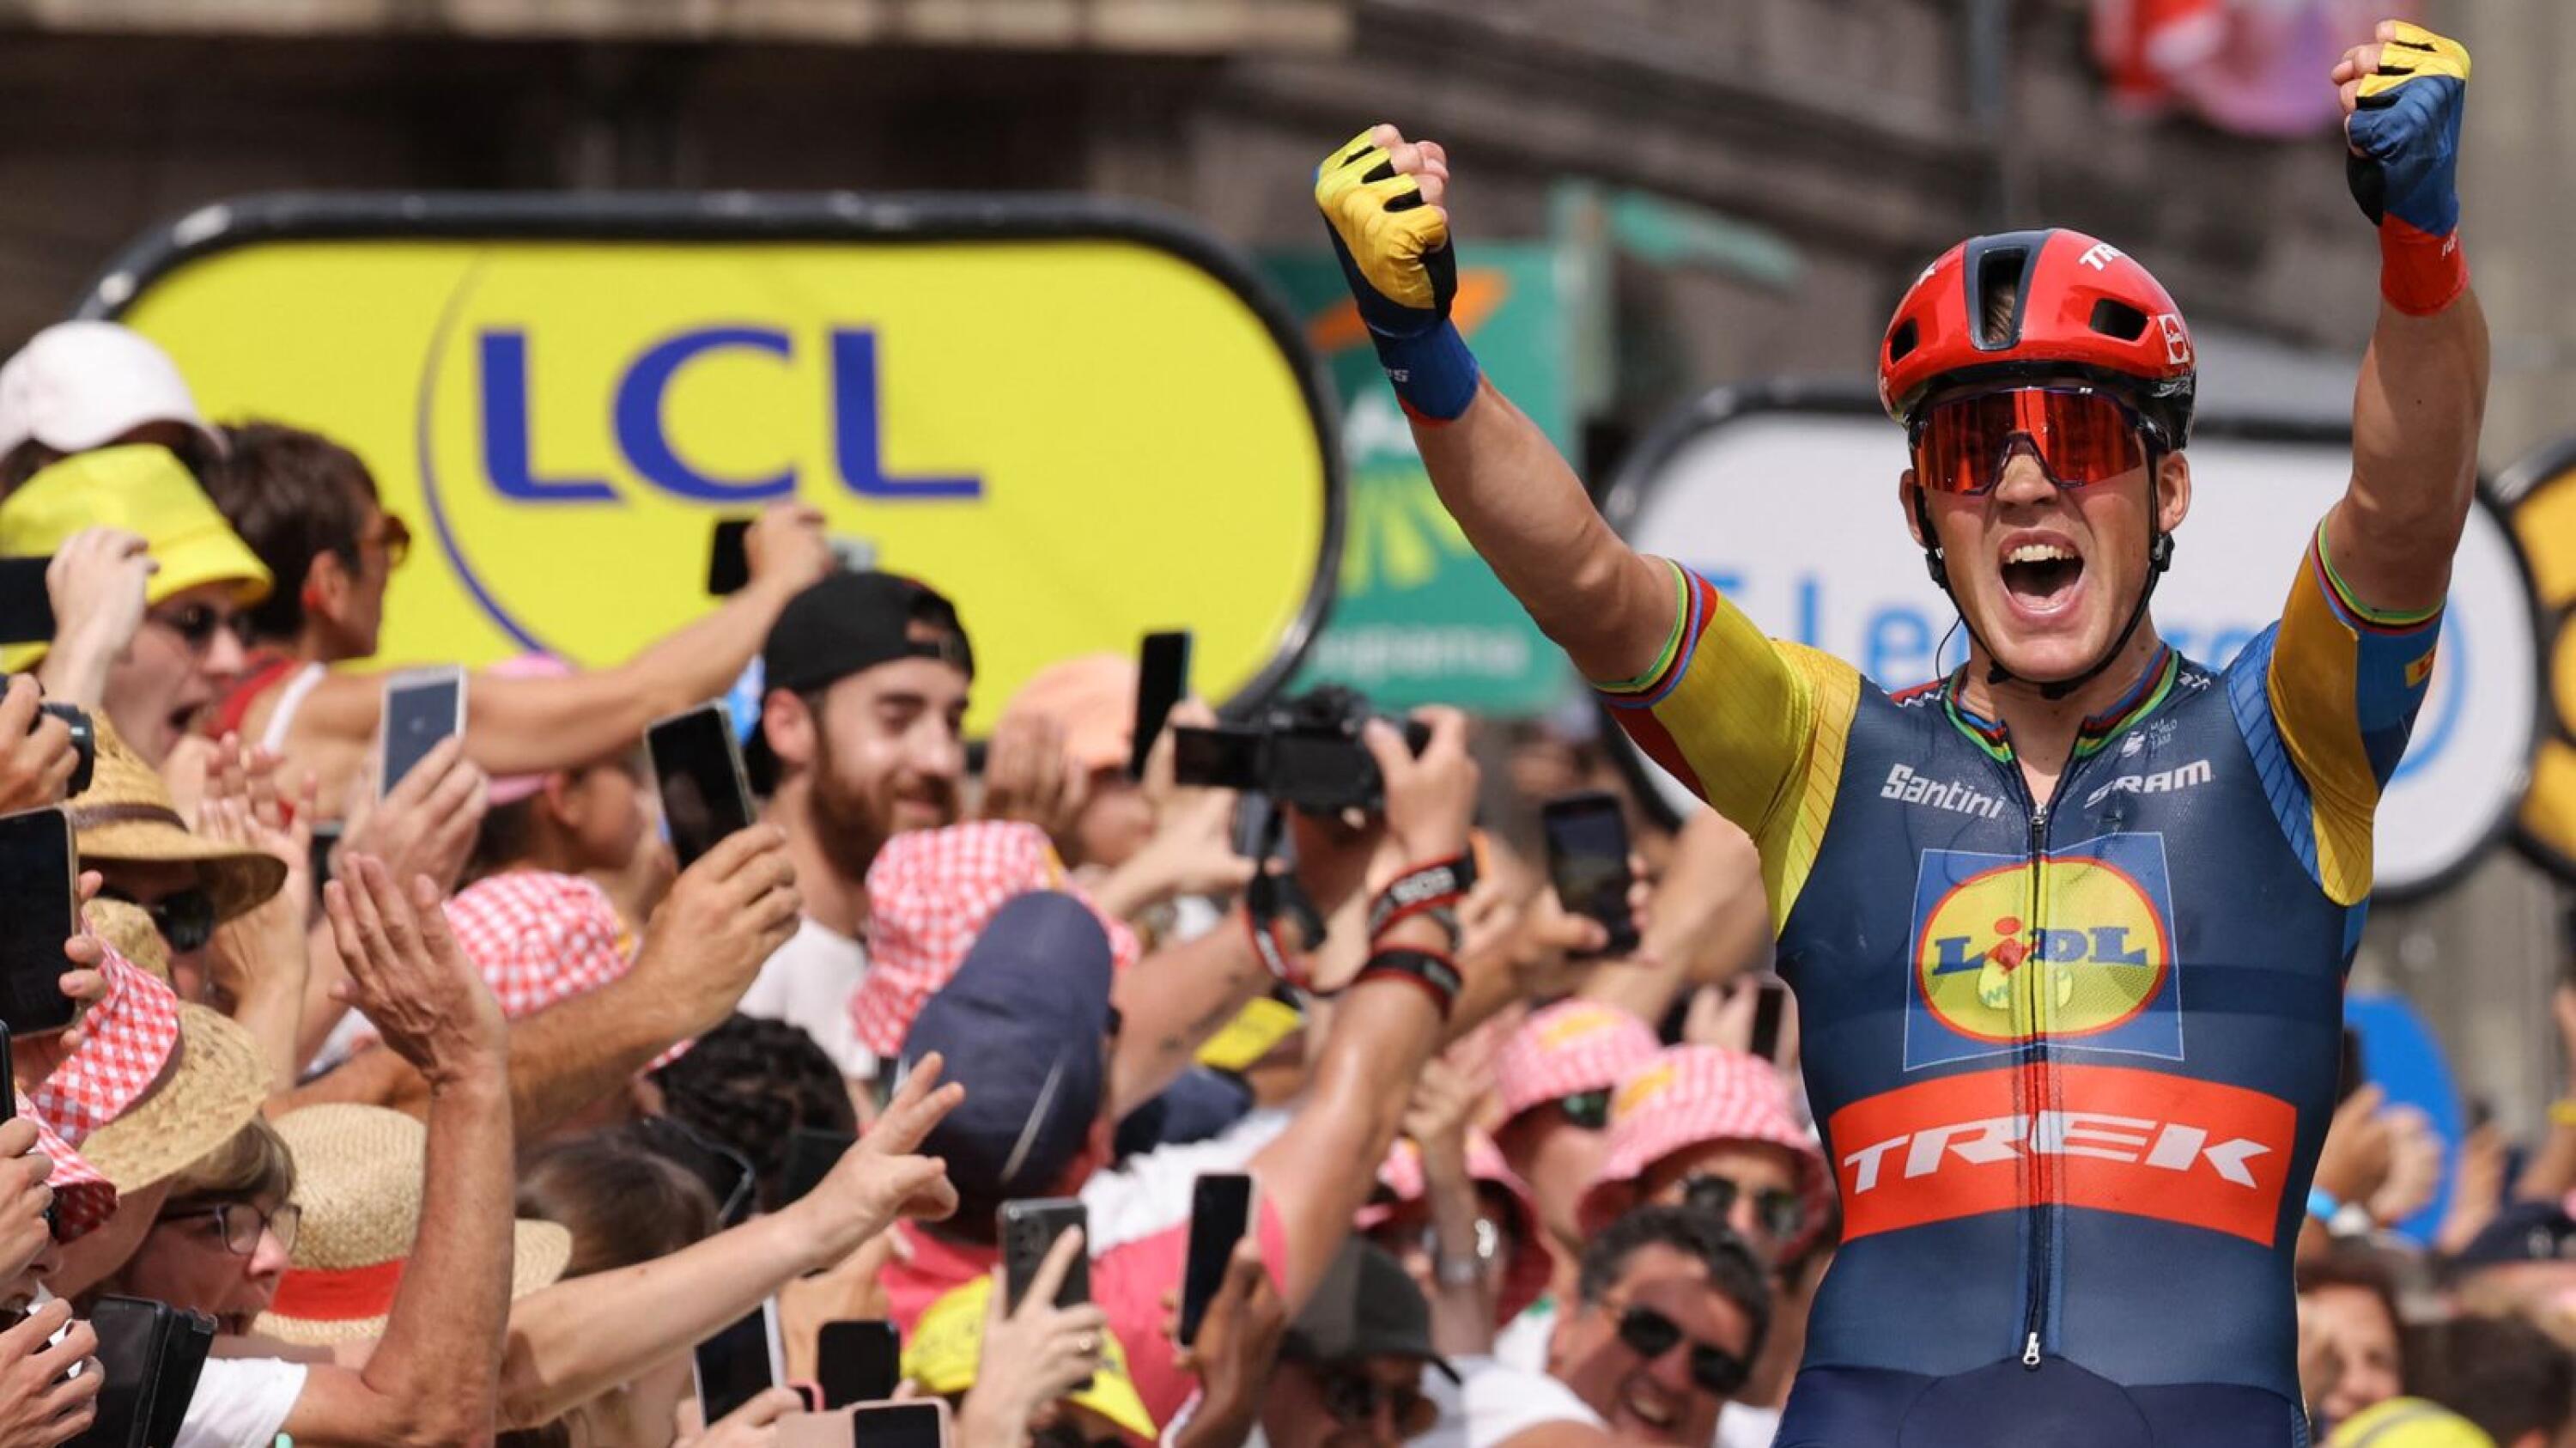 Lidl - Trek's Danish rider Mads Pedersen celebrates as he cycles to the finish line to win the 8th stage of the 110th edition of the Tour de France cycling race on Saturday